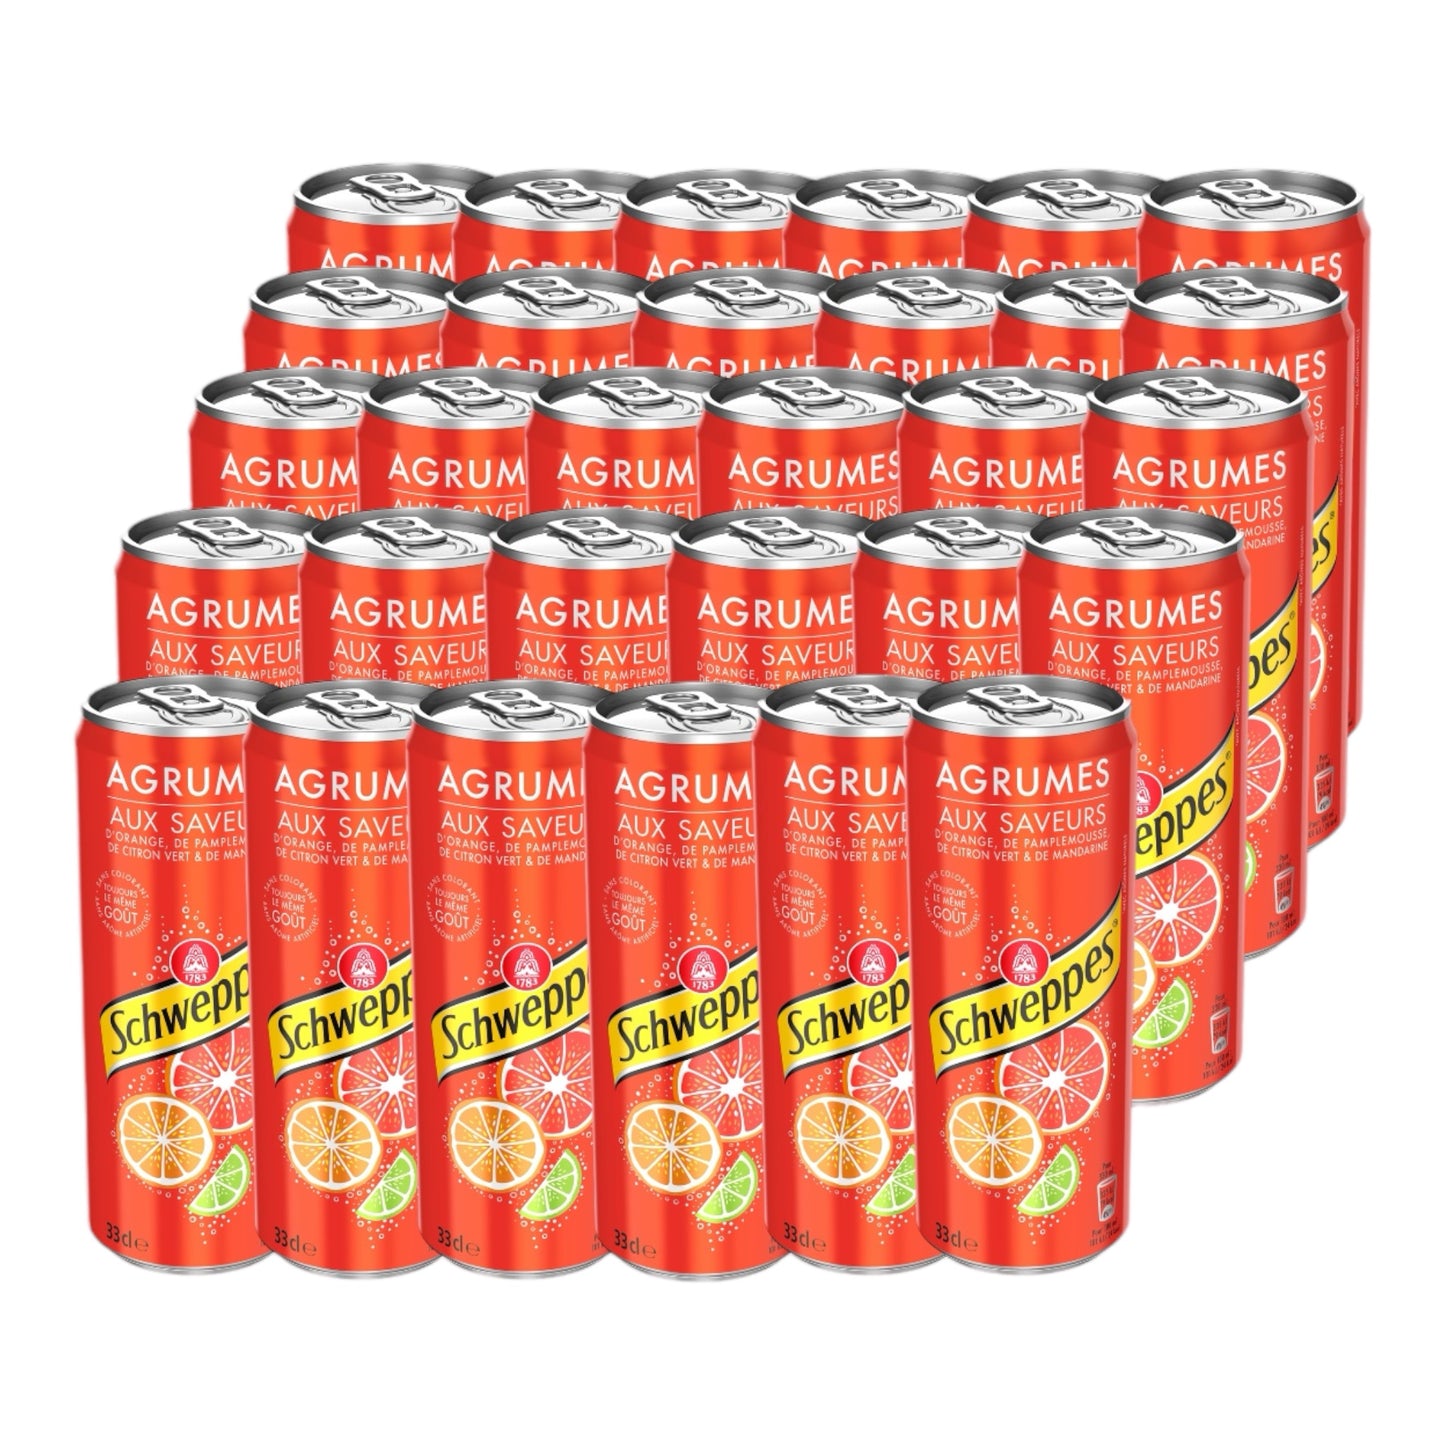 24 pack Schweppes Agrumes Citrus Soda, 11.2 oz can